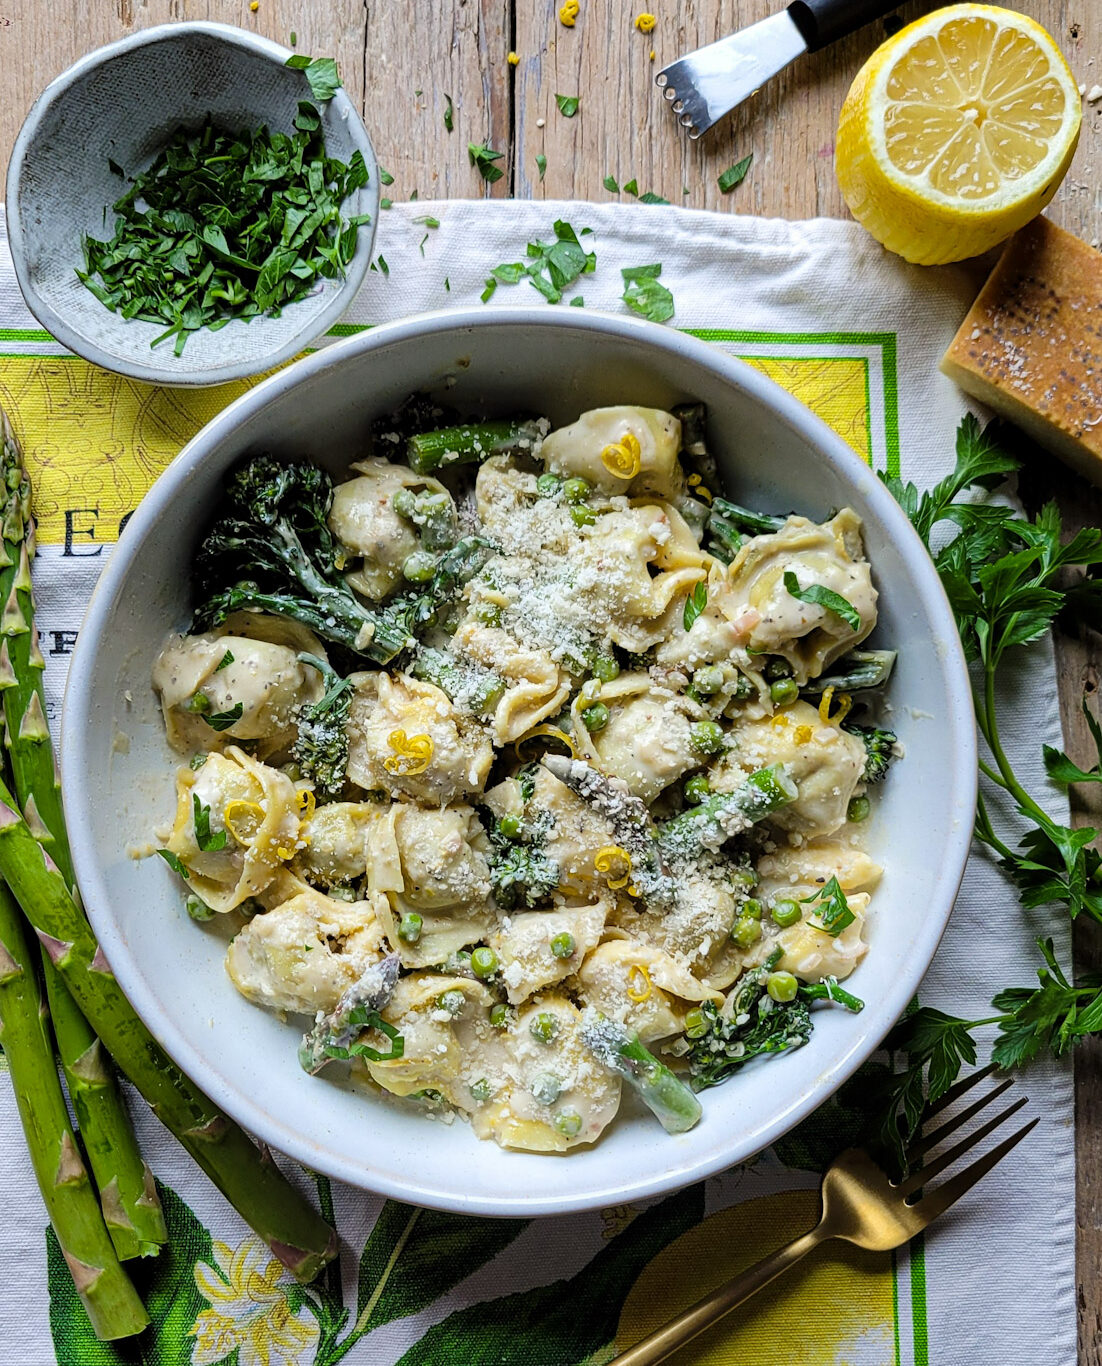 A bowl filled with Lemon Cream Pasta and Spring Vegetables surrounded by chopped parsley and lemon slices